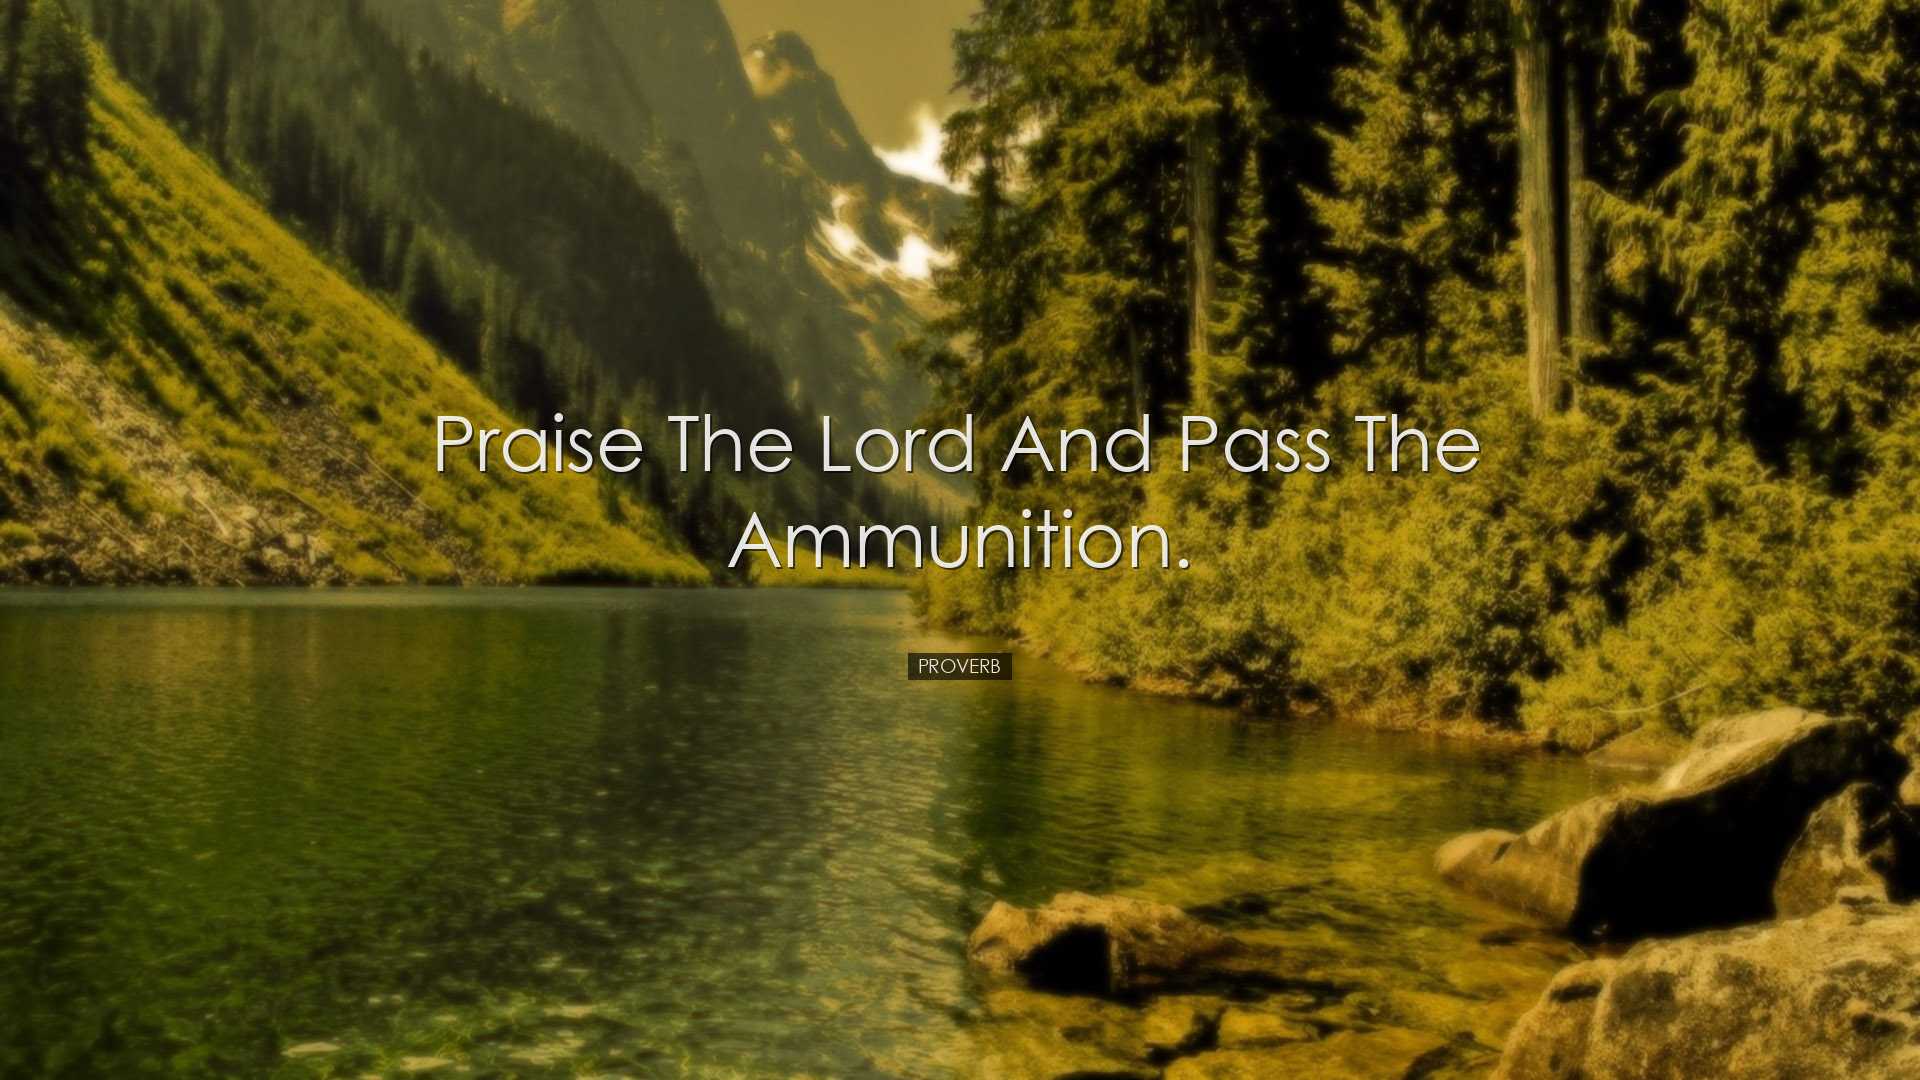 Praise the Lord and pass the ammunition. - Proverb